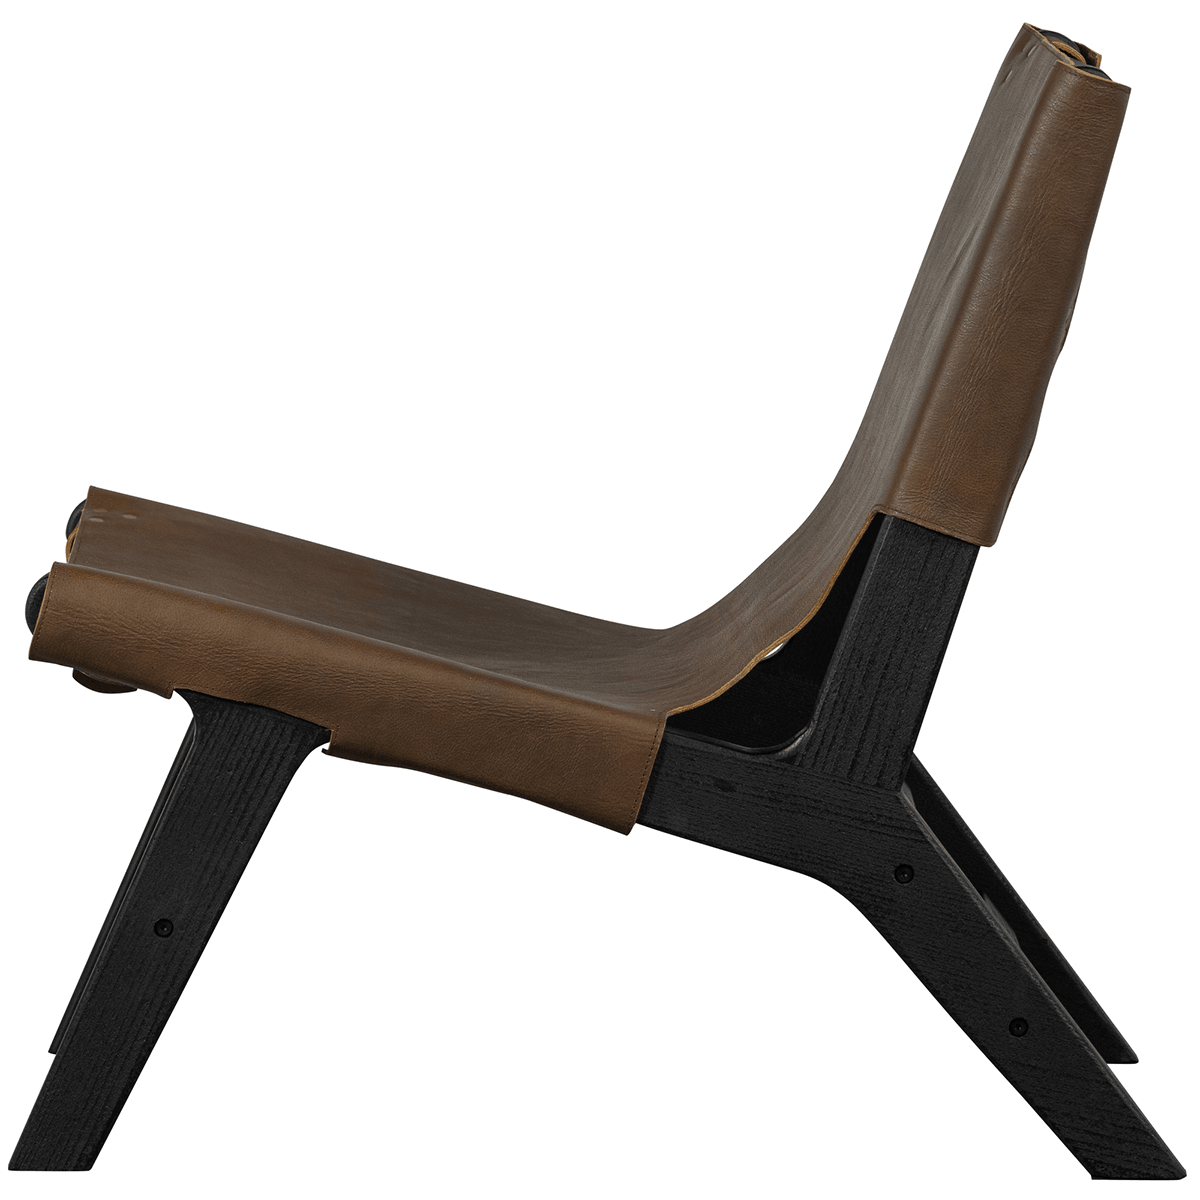 Consume Wood/Real Leather Armchair - WOO .Design